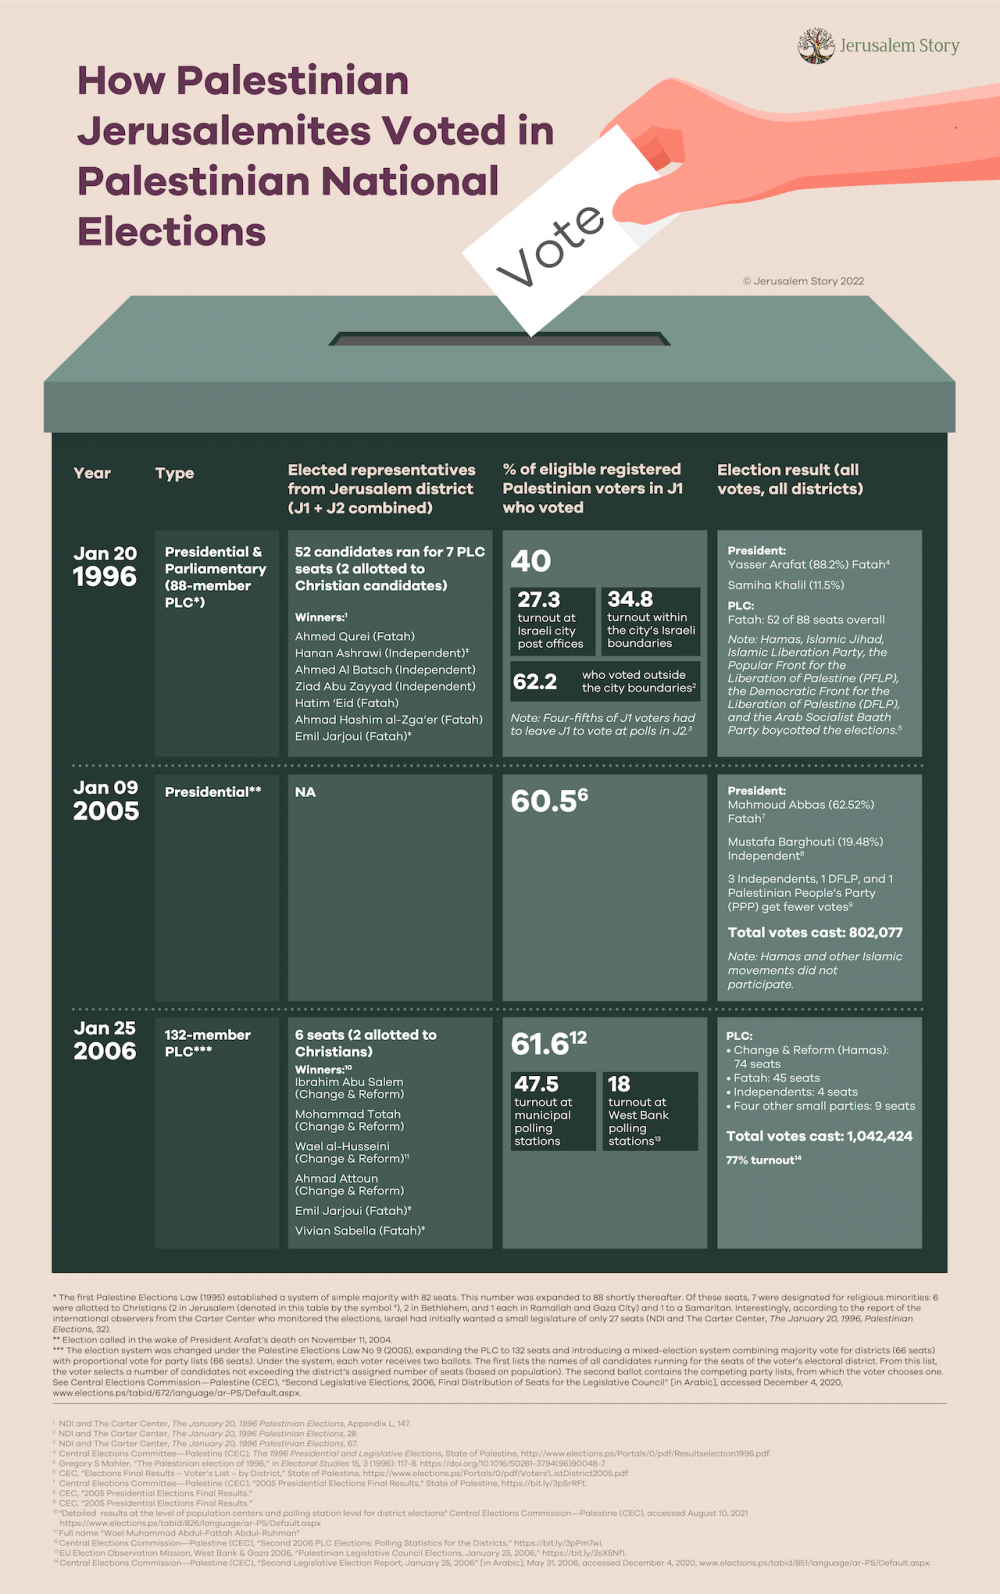 A graphic showing how Palestinians voted across three elections in 1996, 2005, and 2006